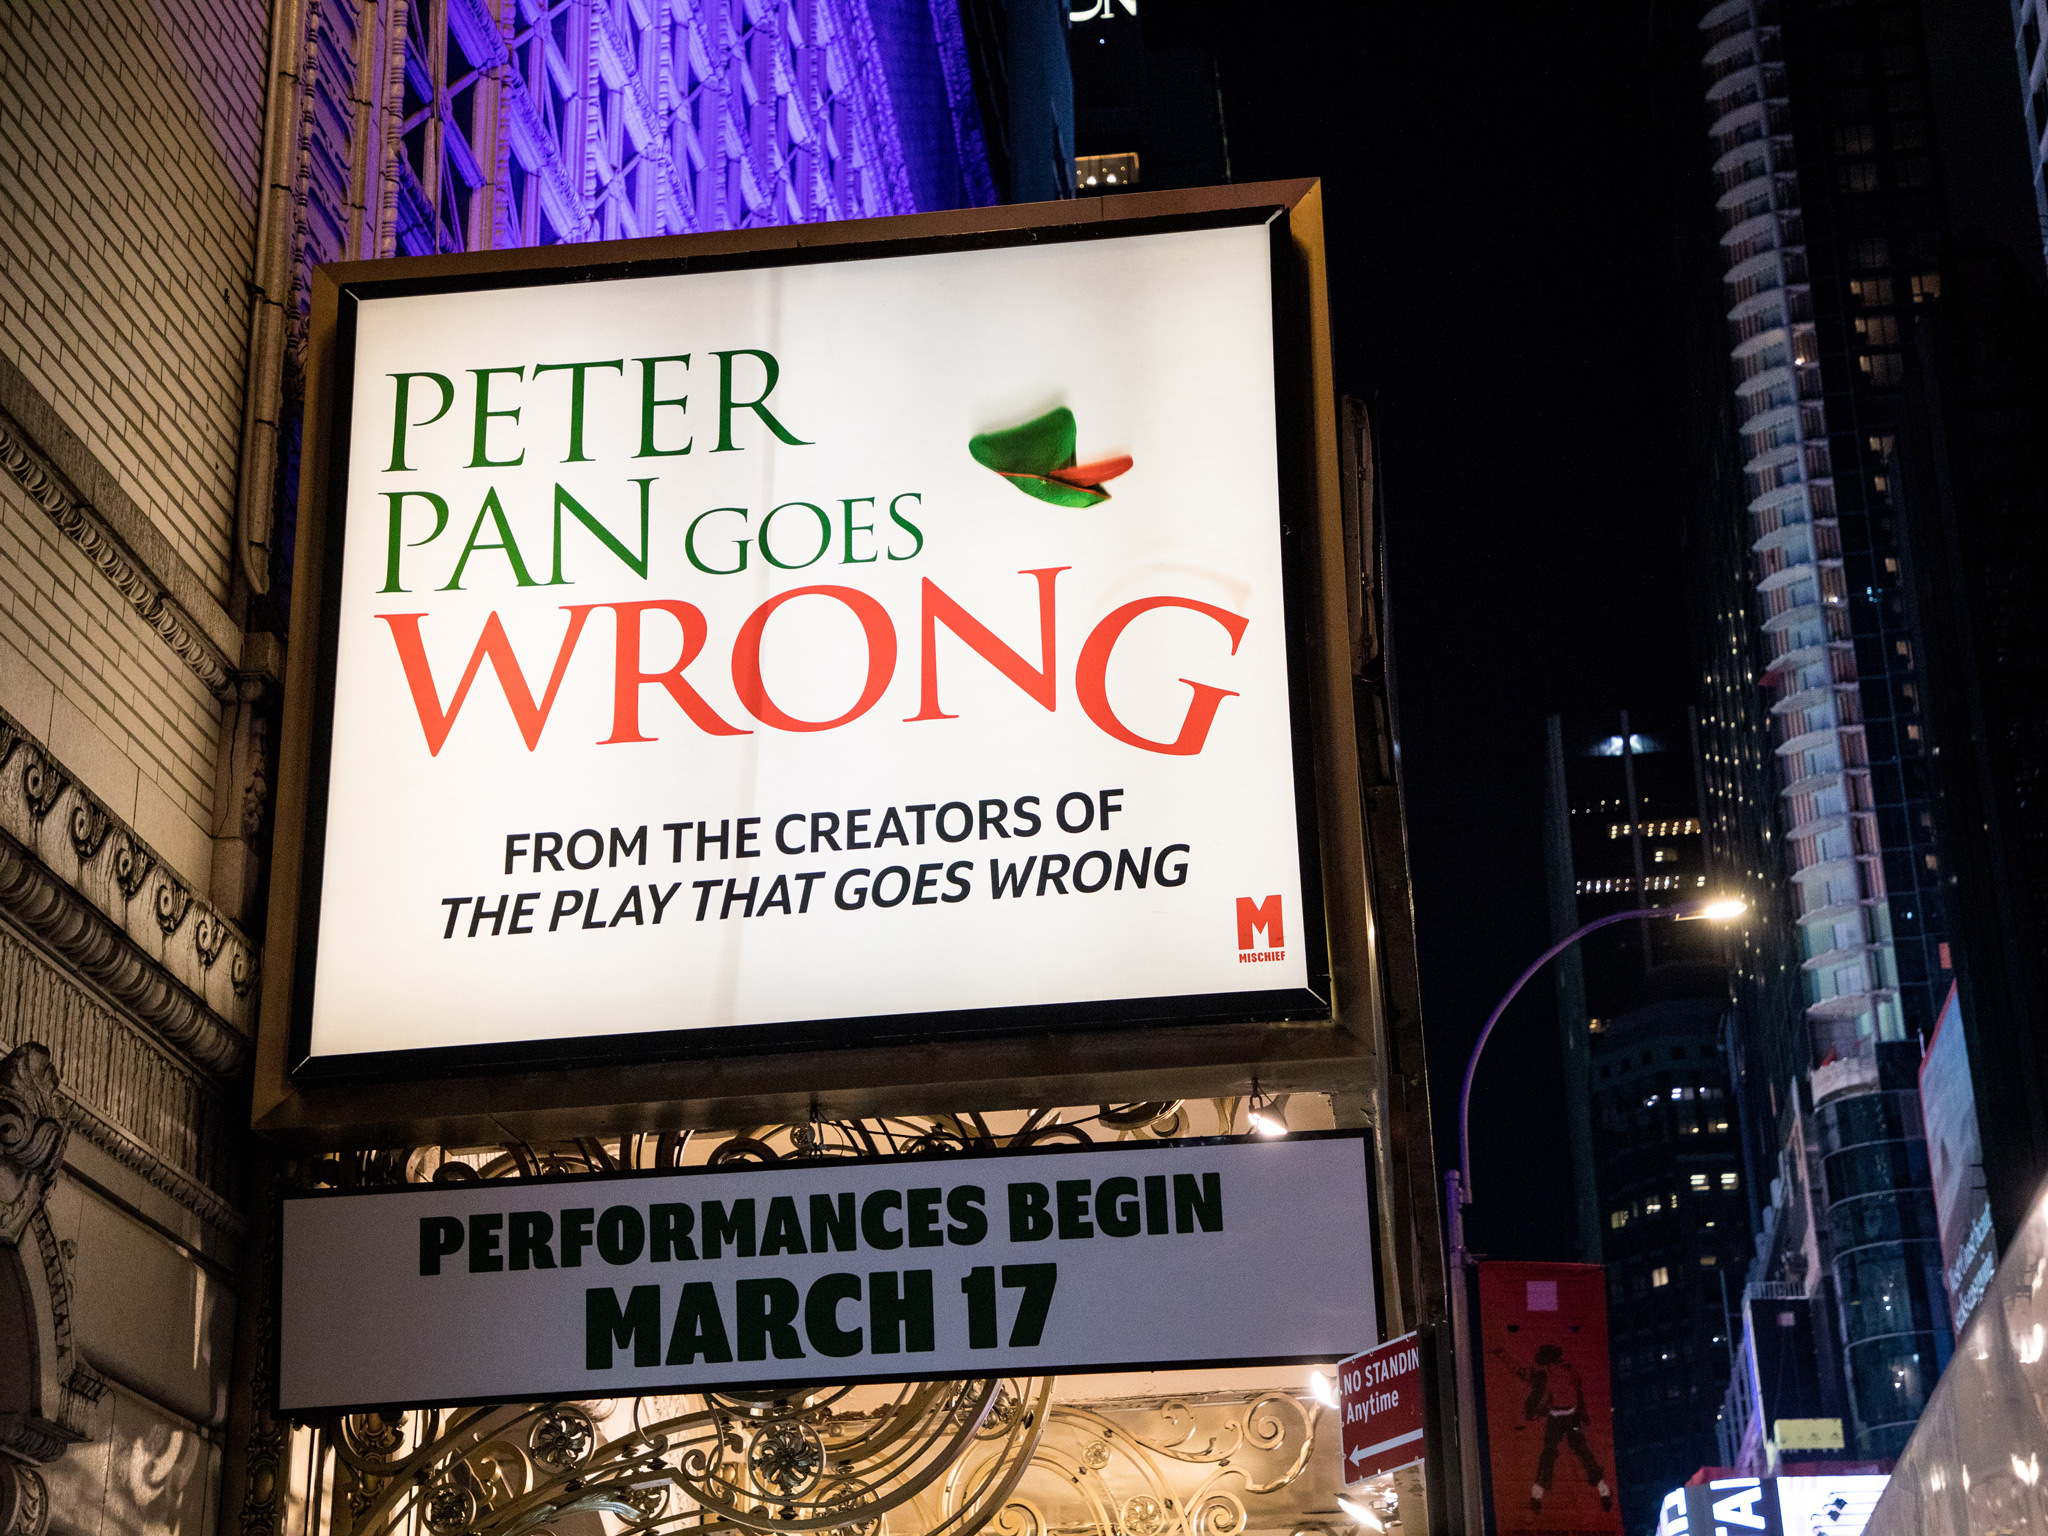 Peter Pan Goes Wrong on Broadway Show Marquee at the Ethel Barrymore Theatre